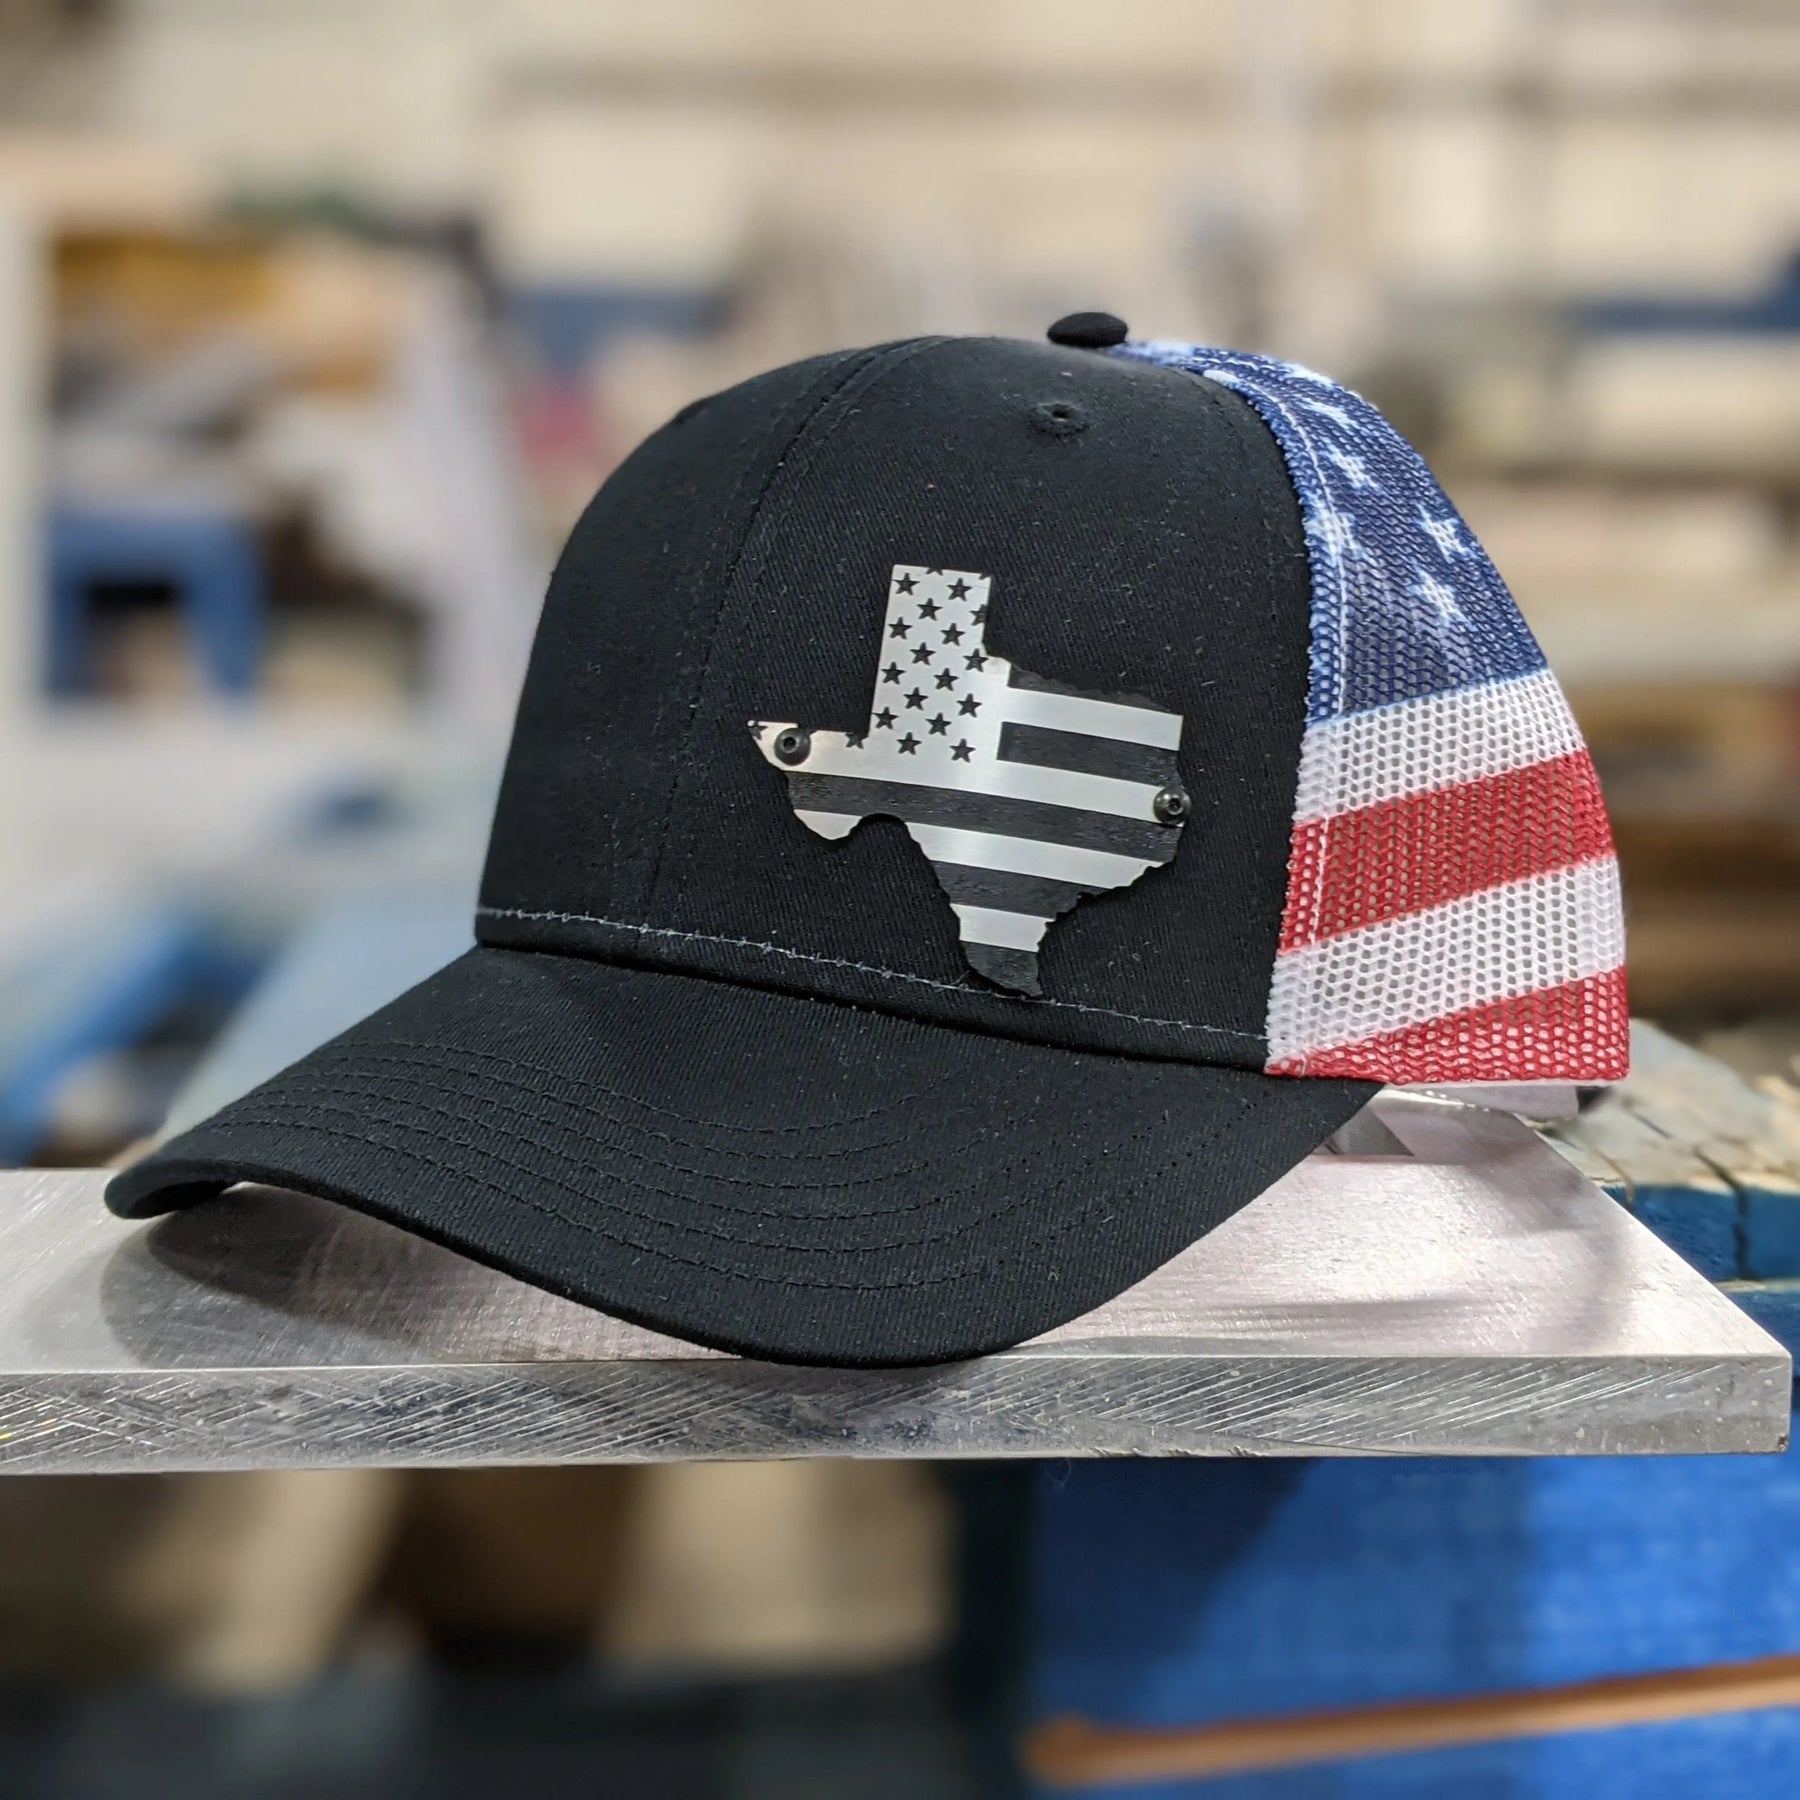 Texas American Flag Badge Hat - Brushed Stainless and Black Badge